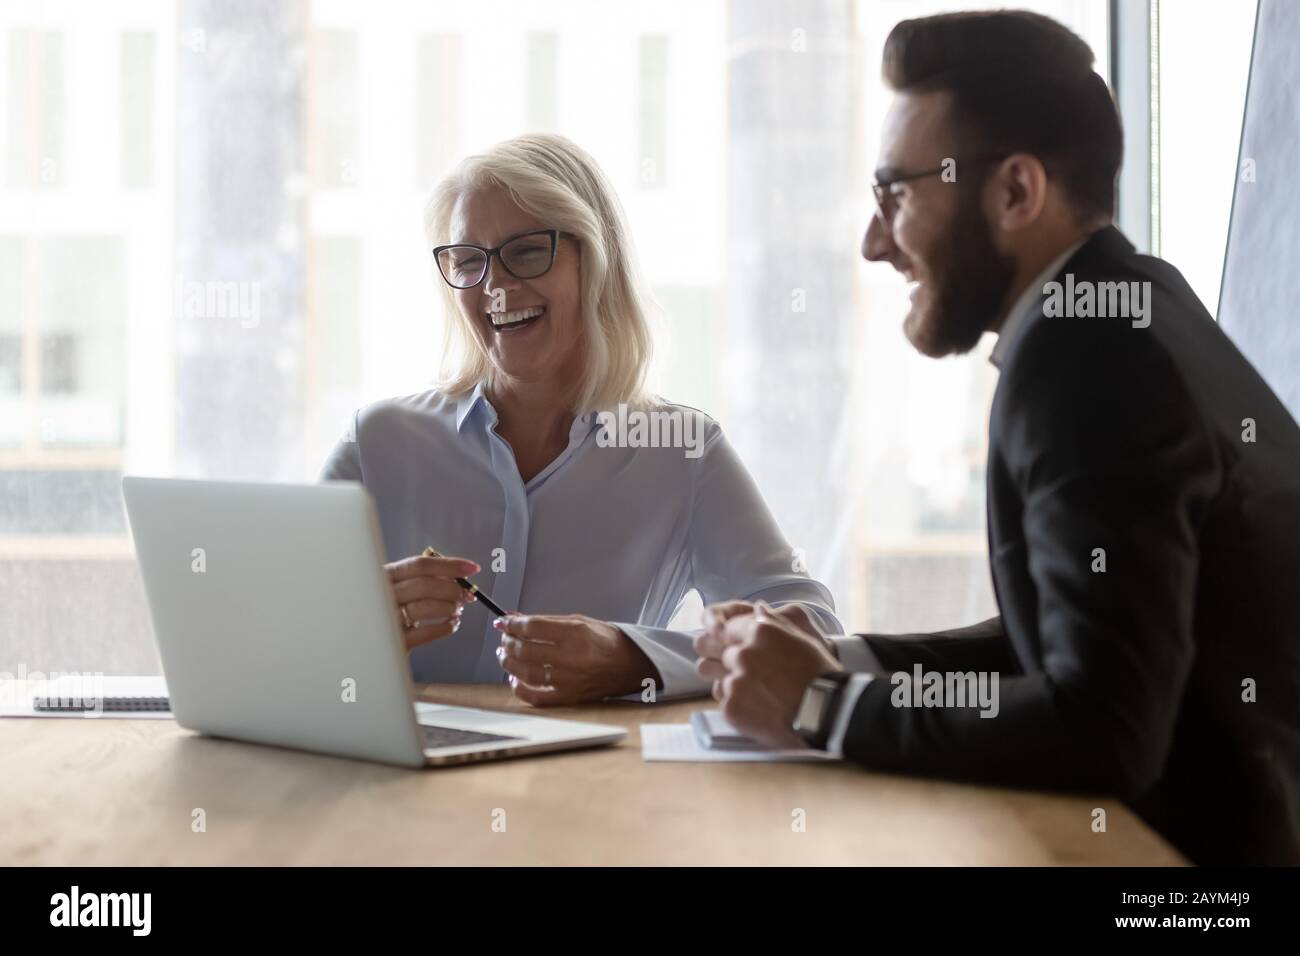 Cheerful younger colleague helps to older woman with computer app Stock Photo